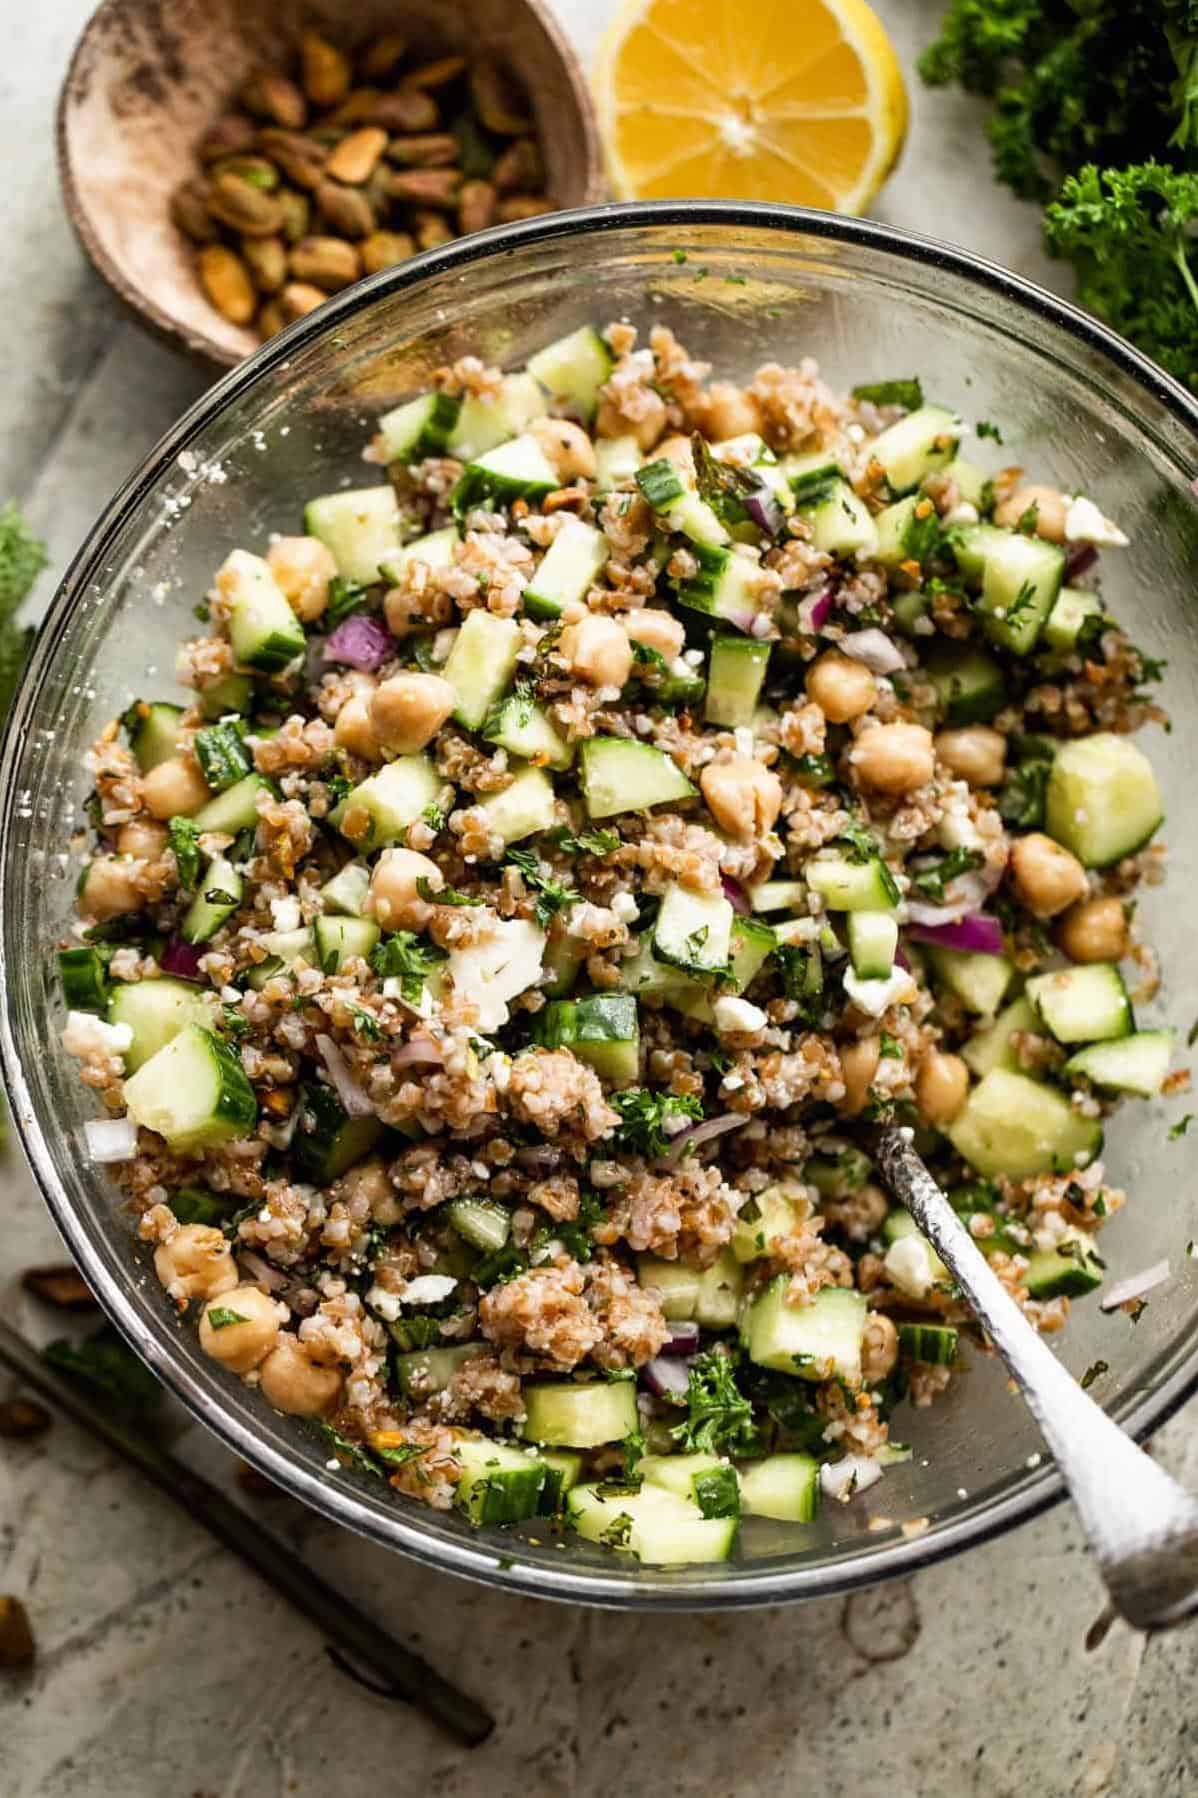  Our bulgur salad is the perfect blend of textures and flavors.